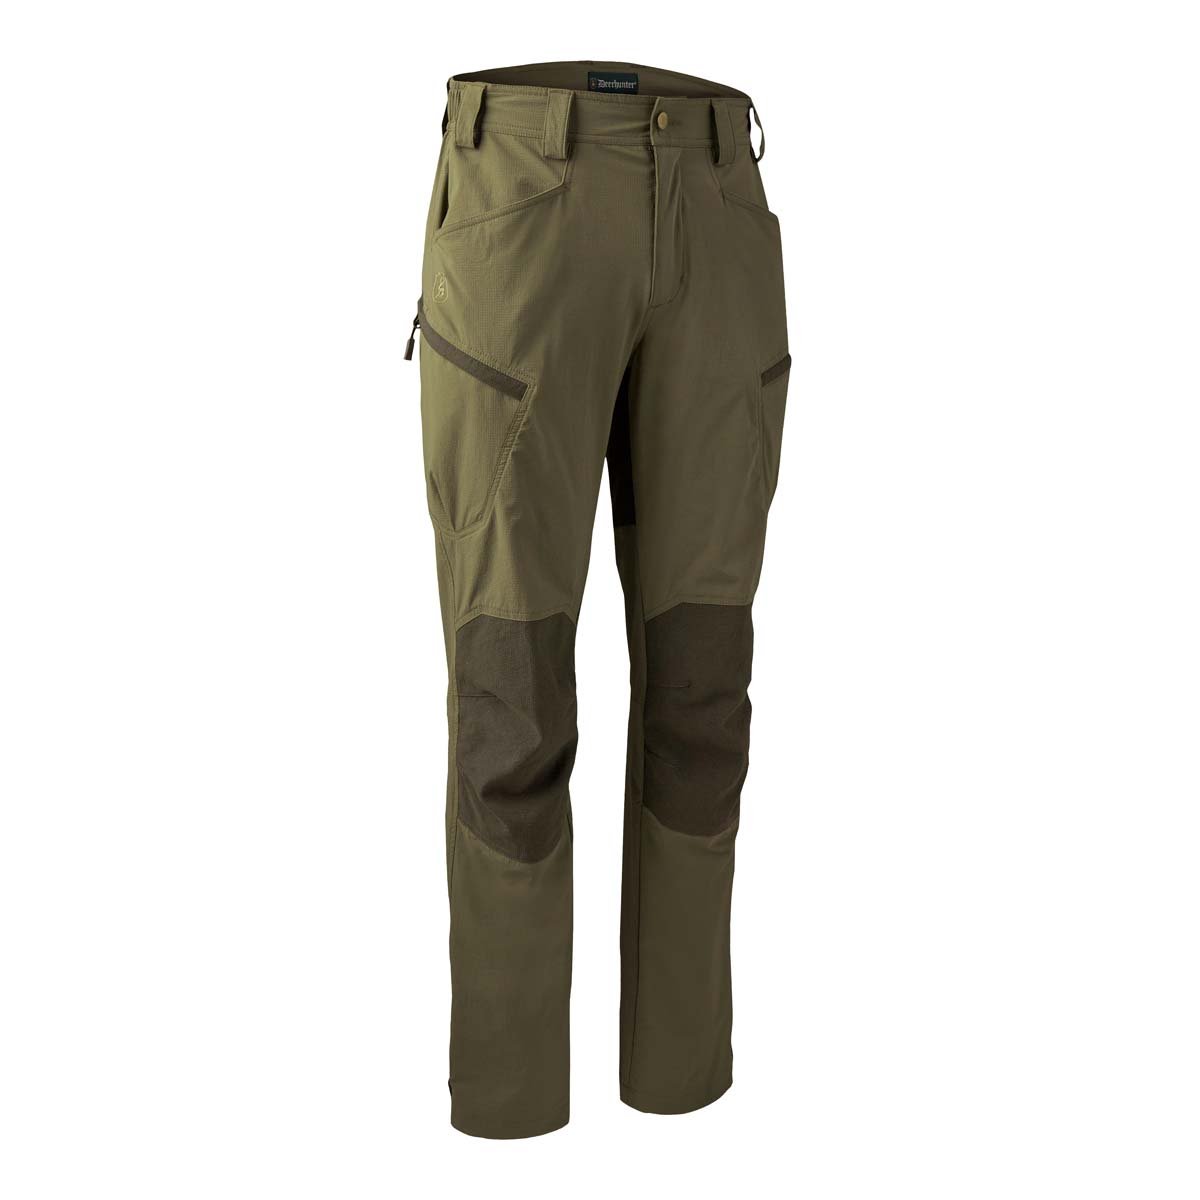 DEERHUNTER Anti-Insect Trousers with HHL Treatment - Mens - Capers